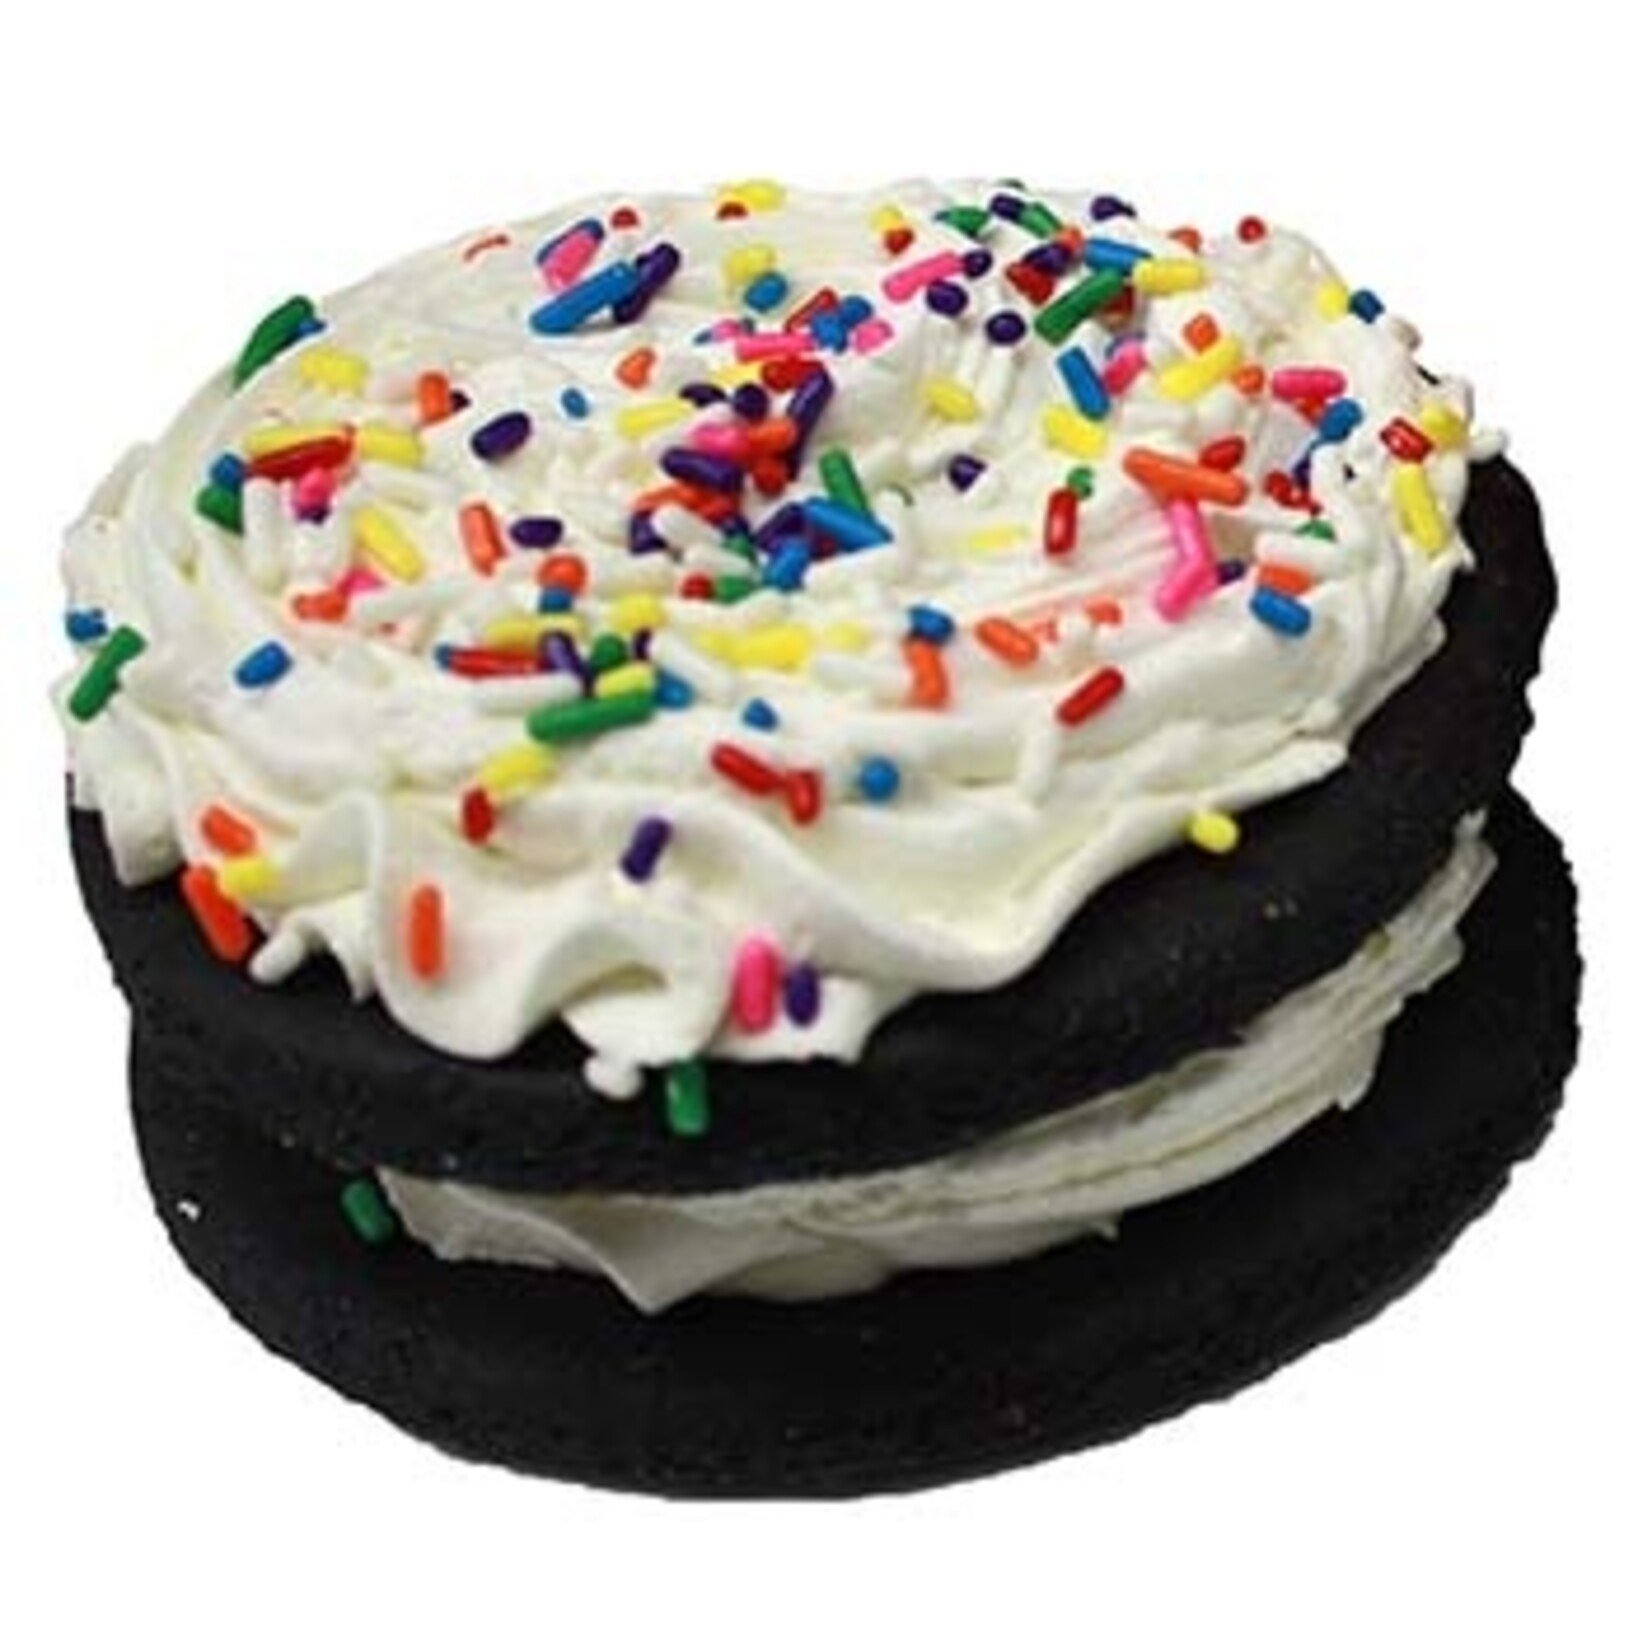 Preppy Puppy Bakery Whoopie Pie Pastry for Dogs